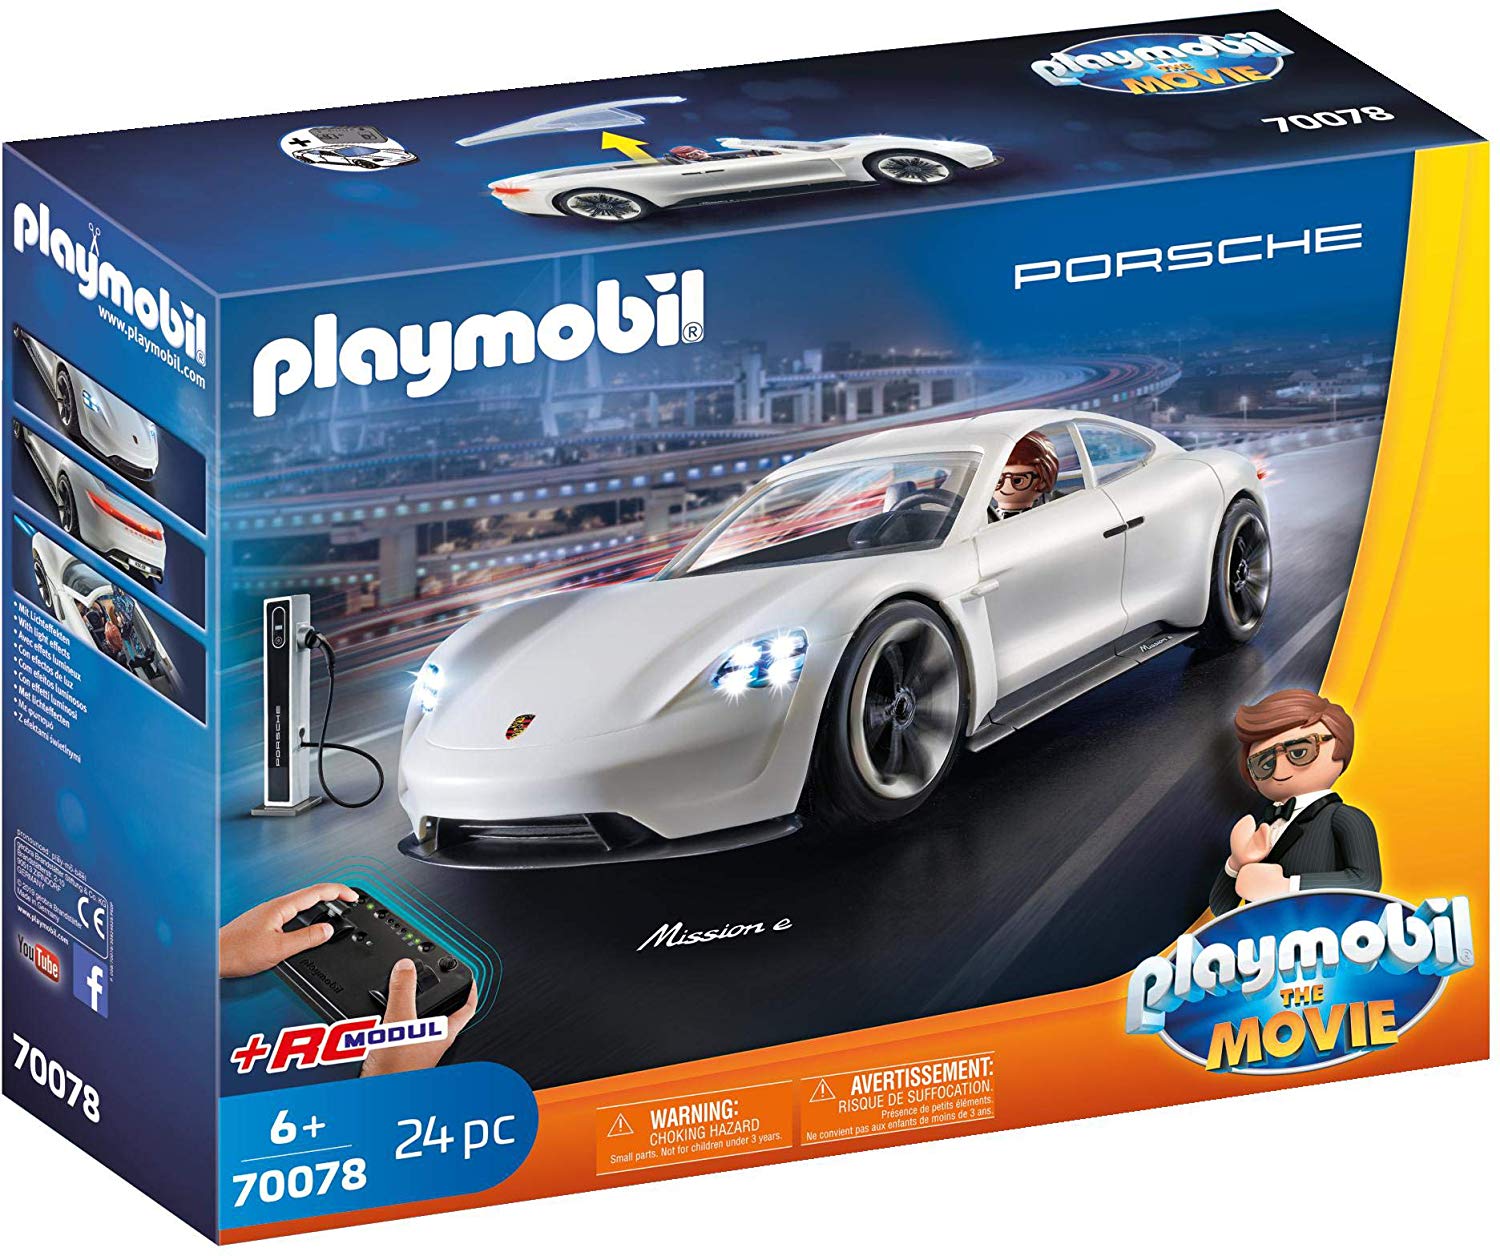 PLAYMOBIL 70078 Porsche, The Movie Toy, Role play, Colourful, One Size